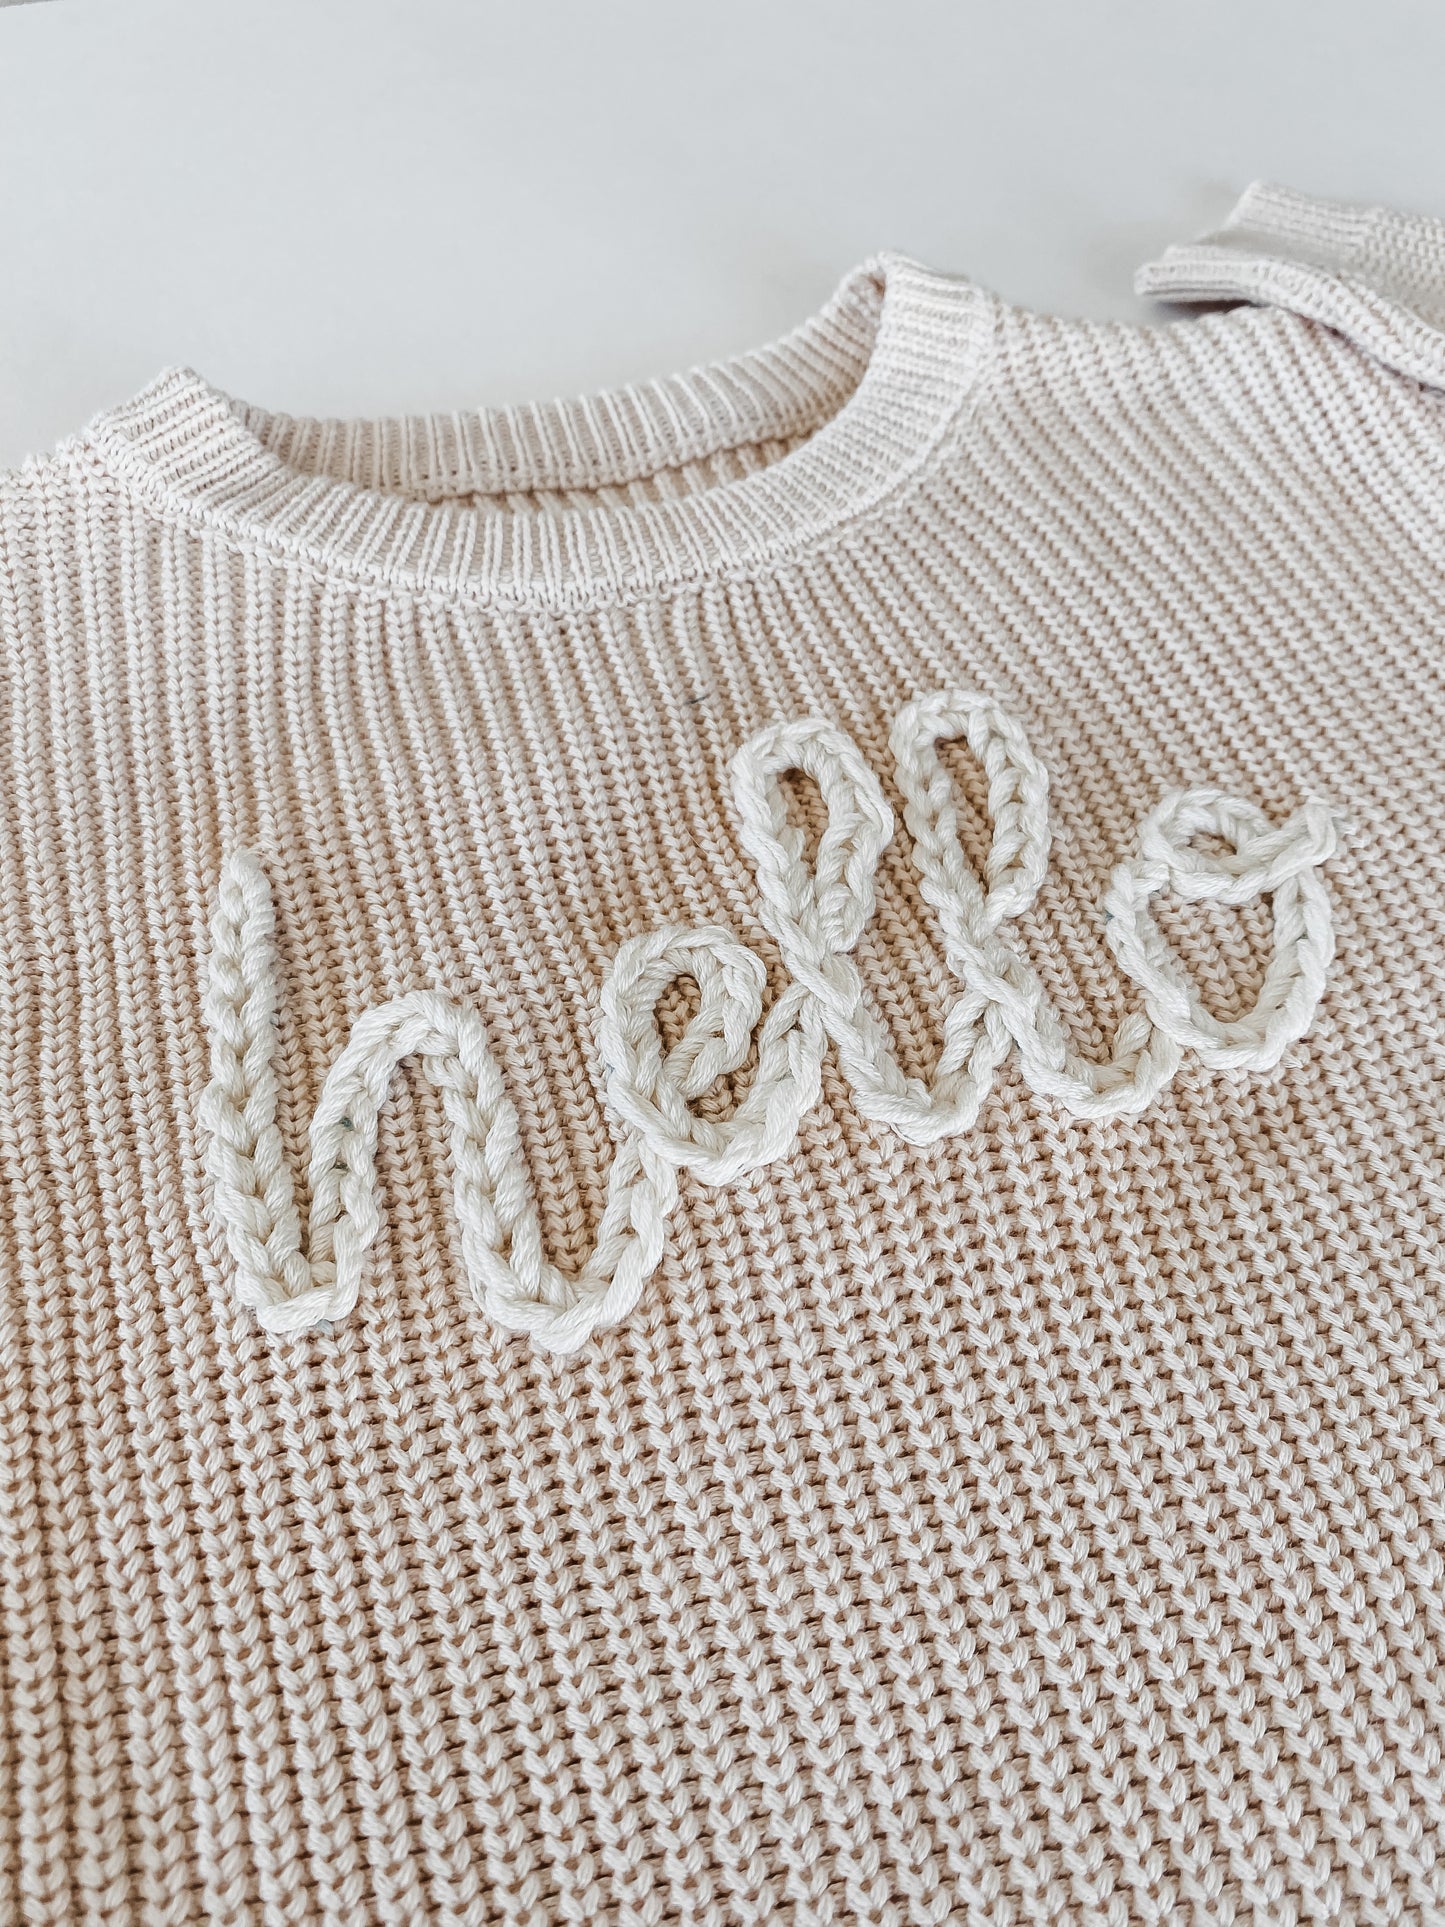 Embroidered Sweater Stitch Along